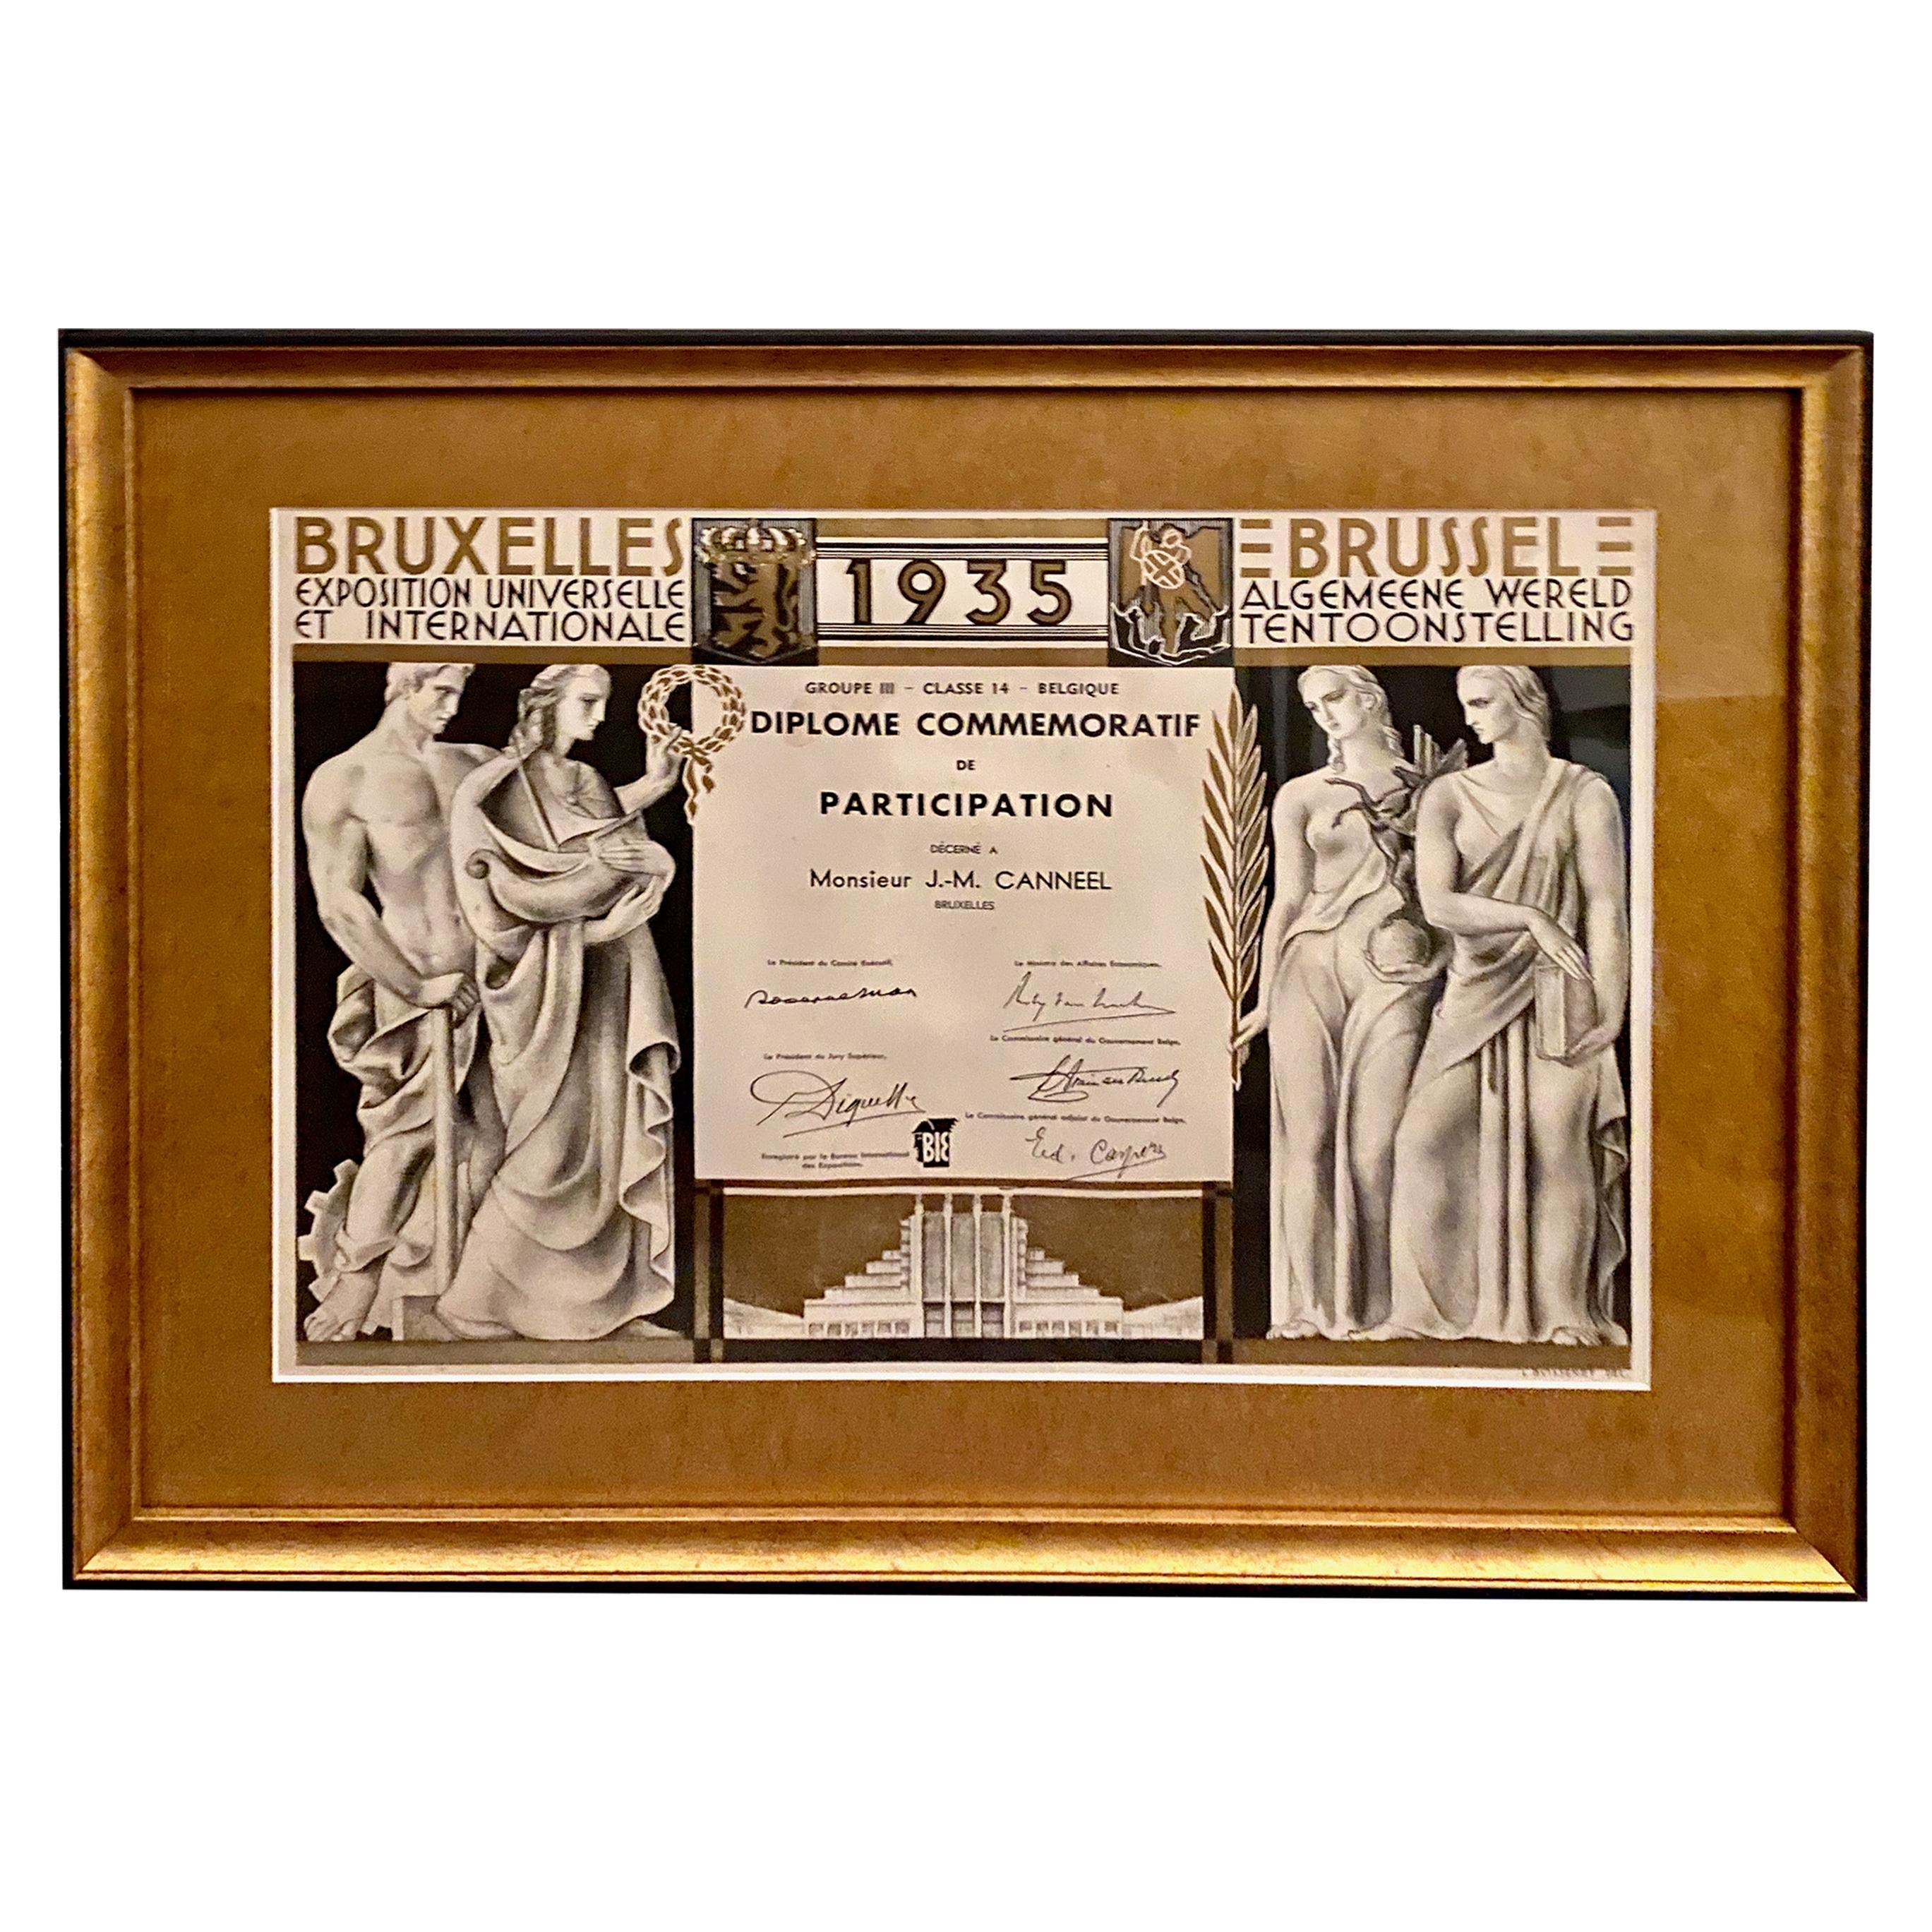 Commemorative Diploma for Belgian Artistic Art Deco Exposition For Sale